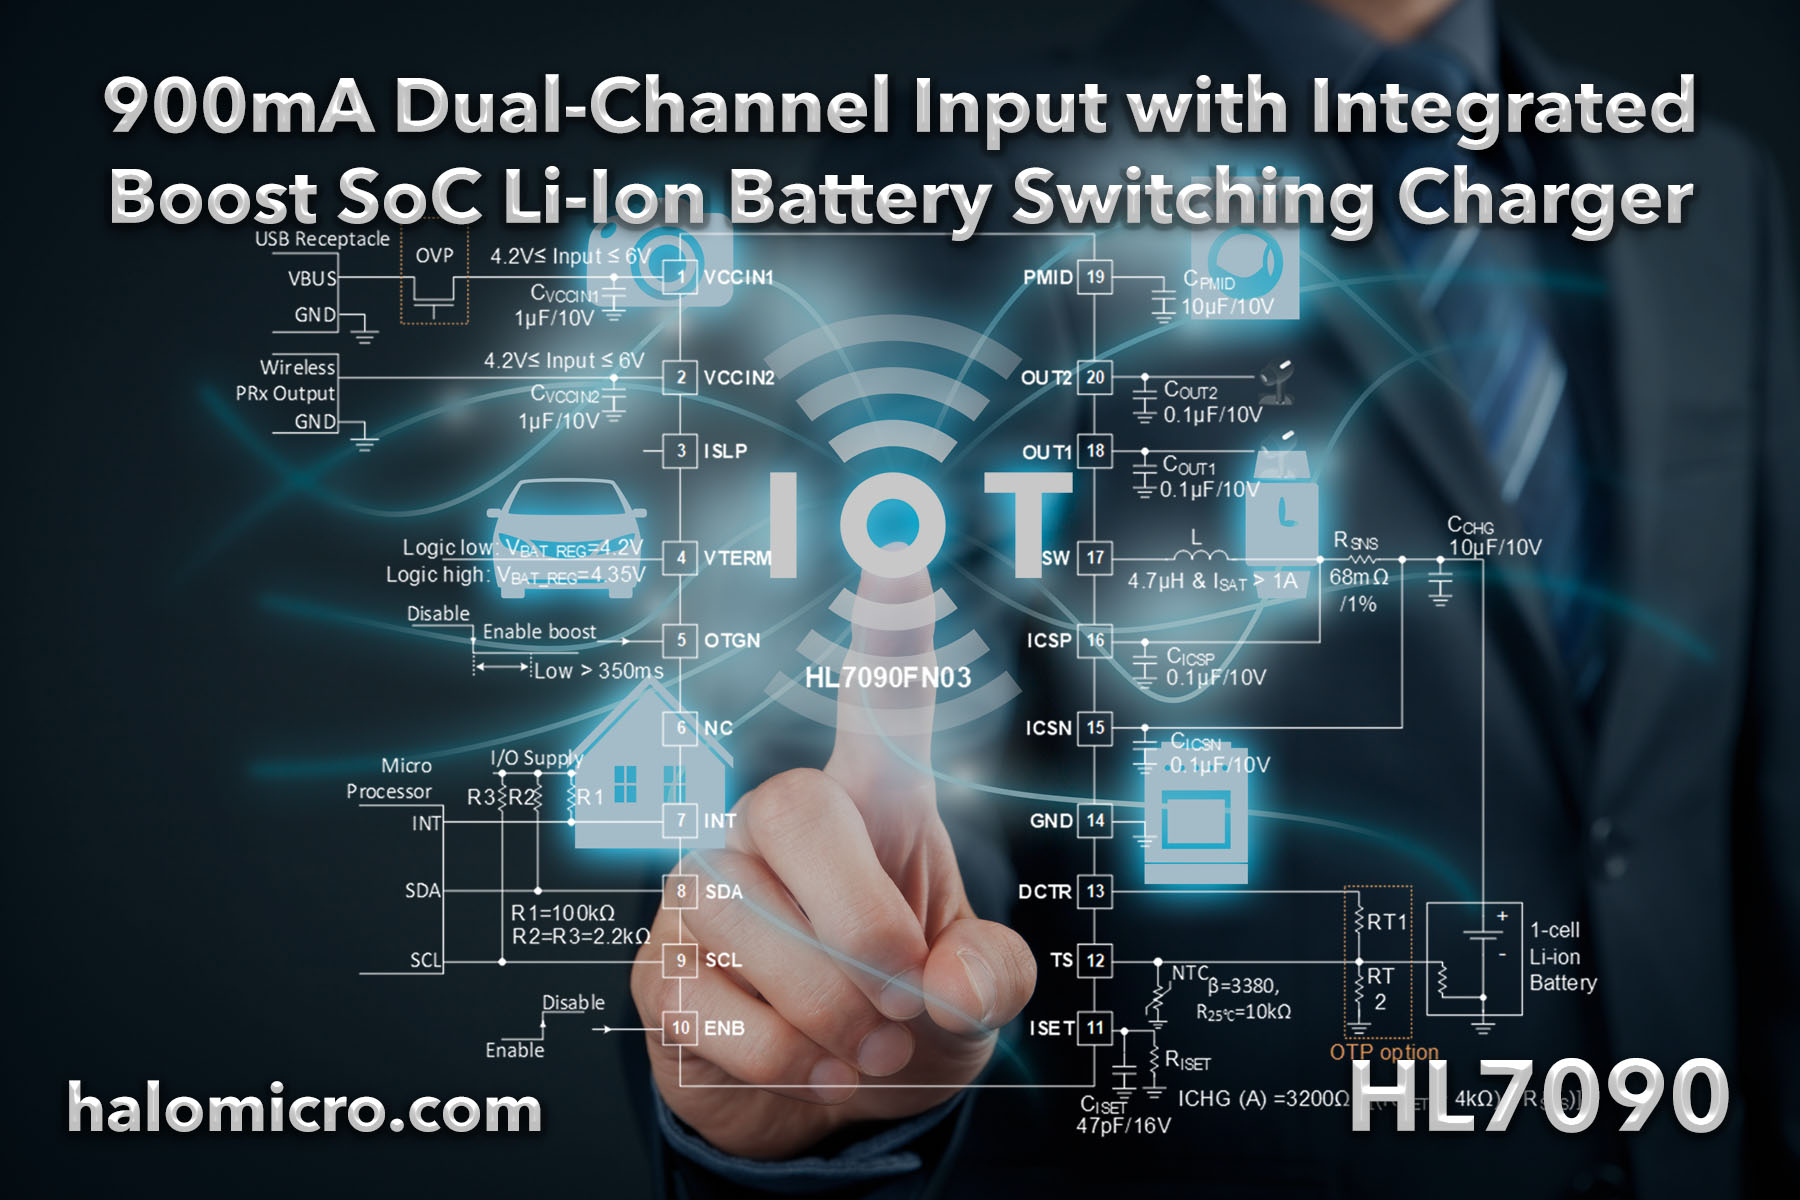 900mA Dual-Channel Input with Integrated Boost SoC Li-Ion Battery Switching Charger